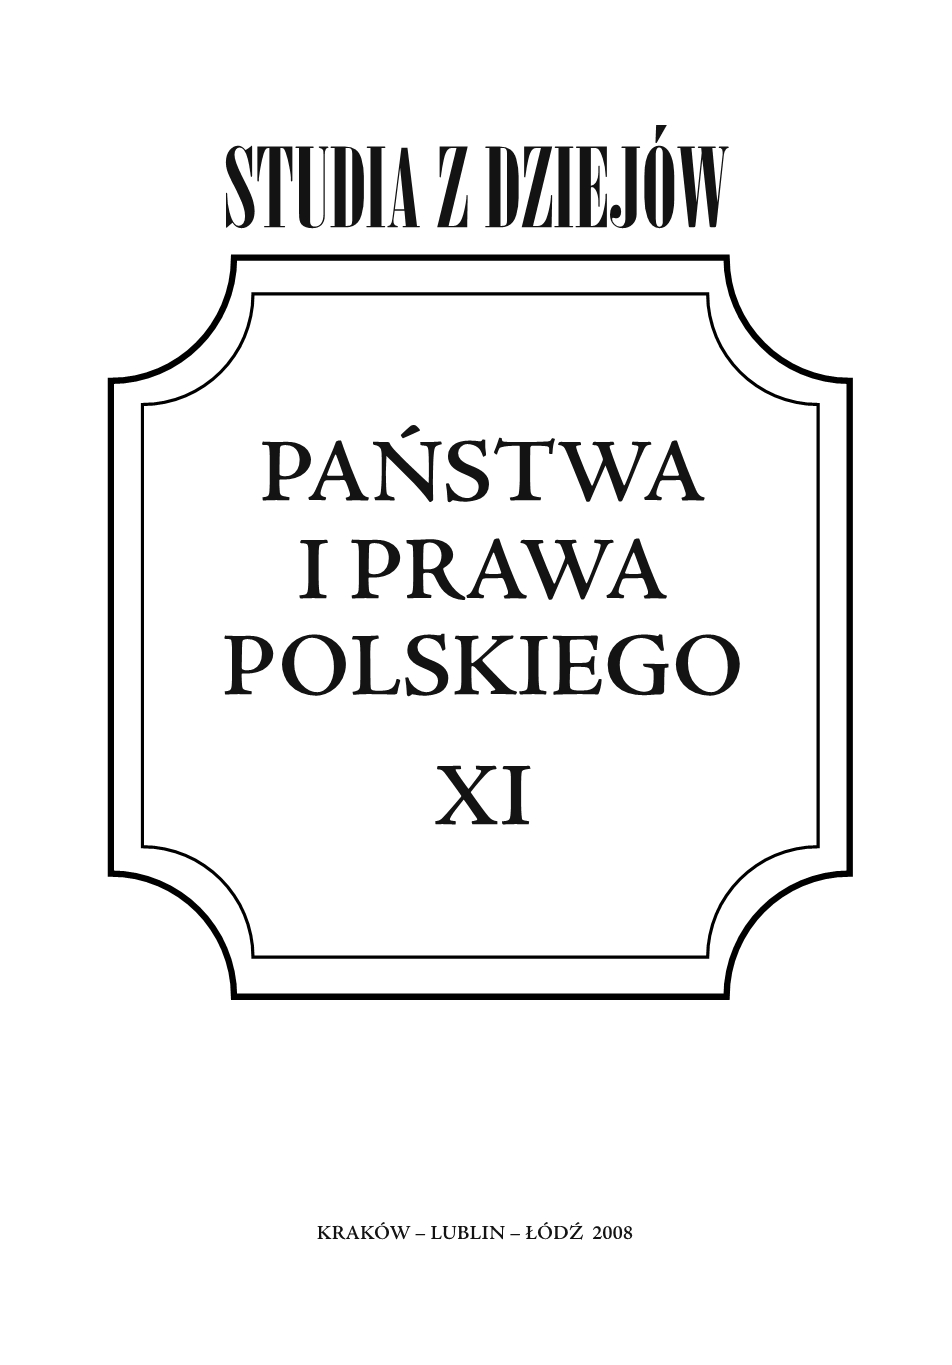 The project to create a Ukrainian university in Krakow in 1924 against the background of disputes over Ukrainian aspirations to create its own university Cover Image